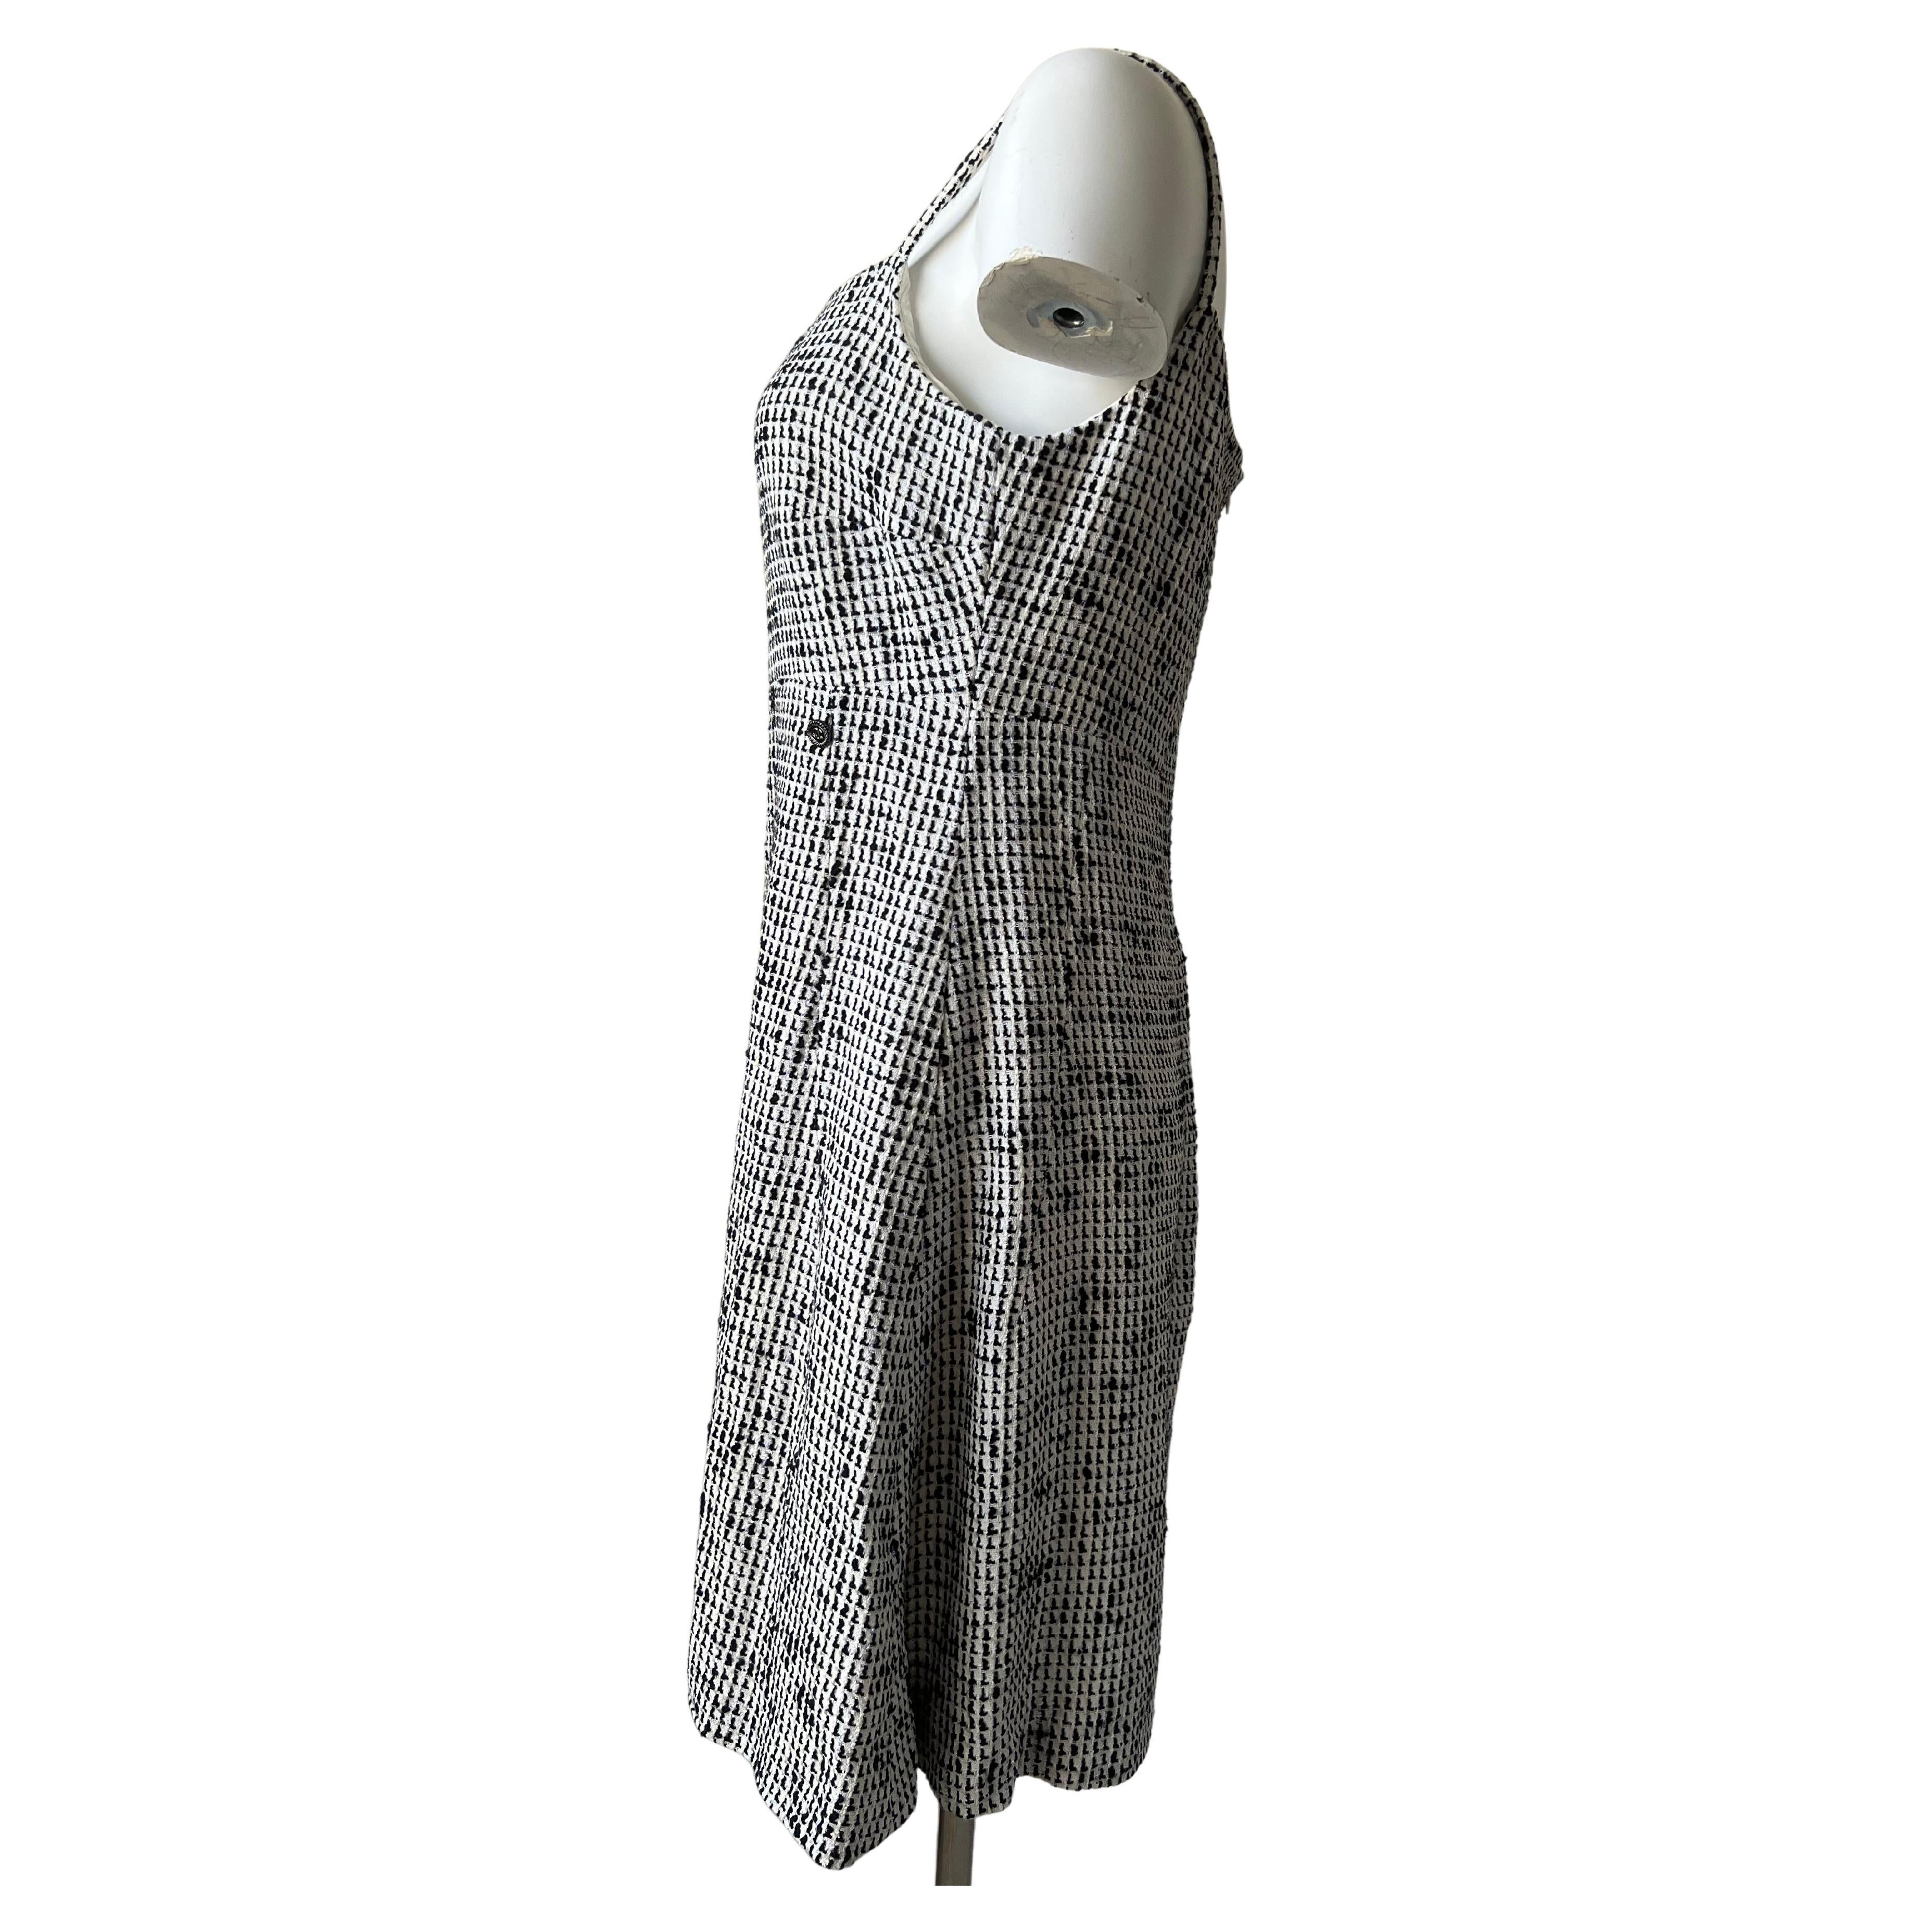 Black and White Tweed Dress Chanel 2010 In Good Condition For Sale In Palm Beach, FL